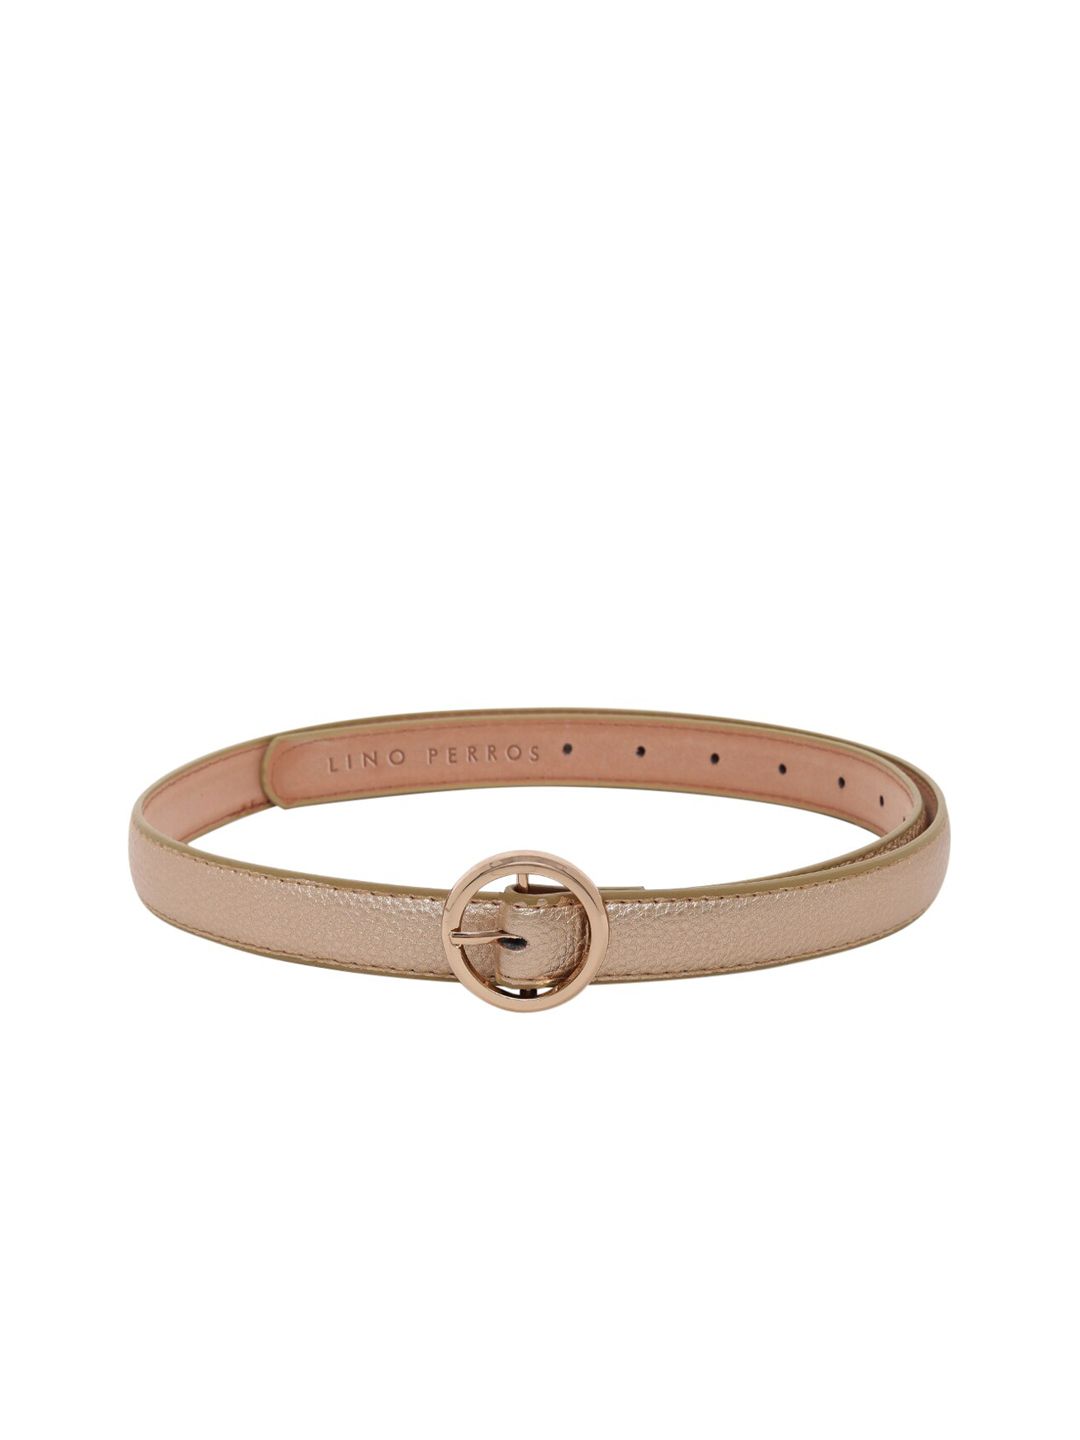 Lino Perros Women Gold-Toned Textured Belt Price in India